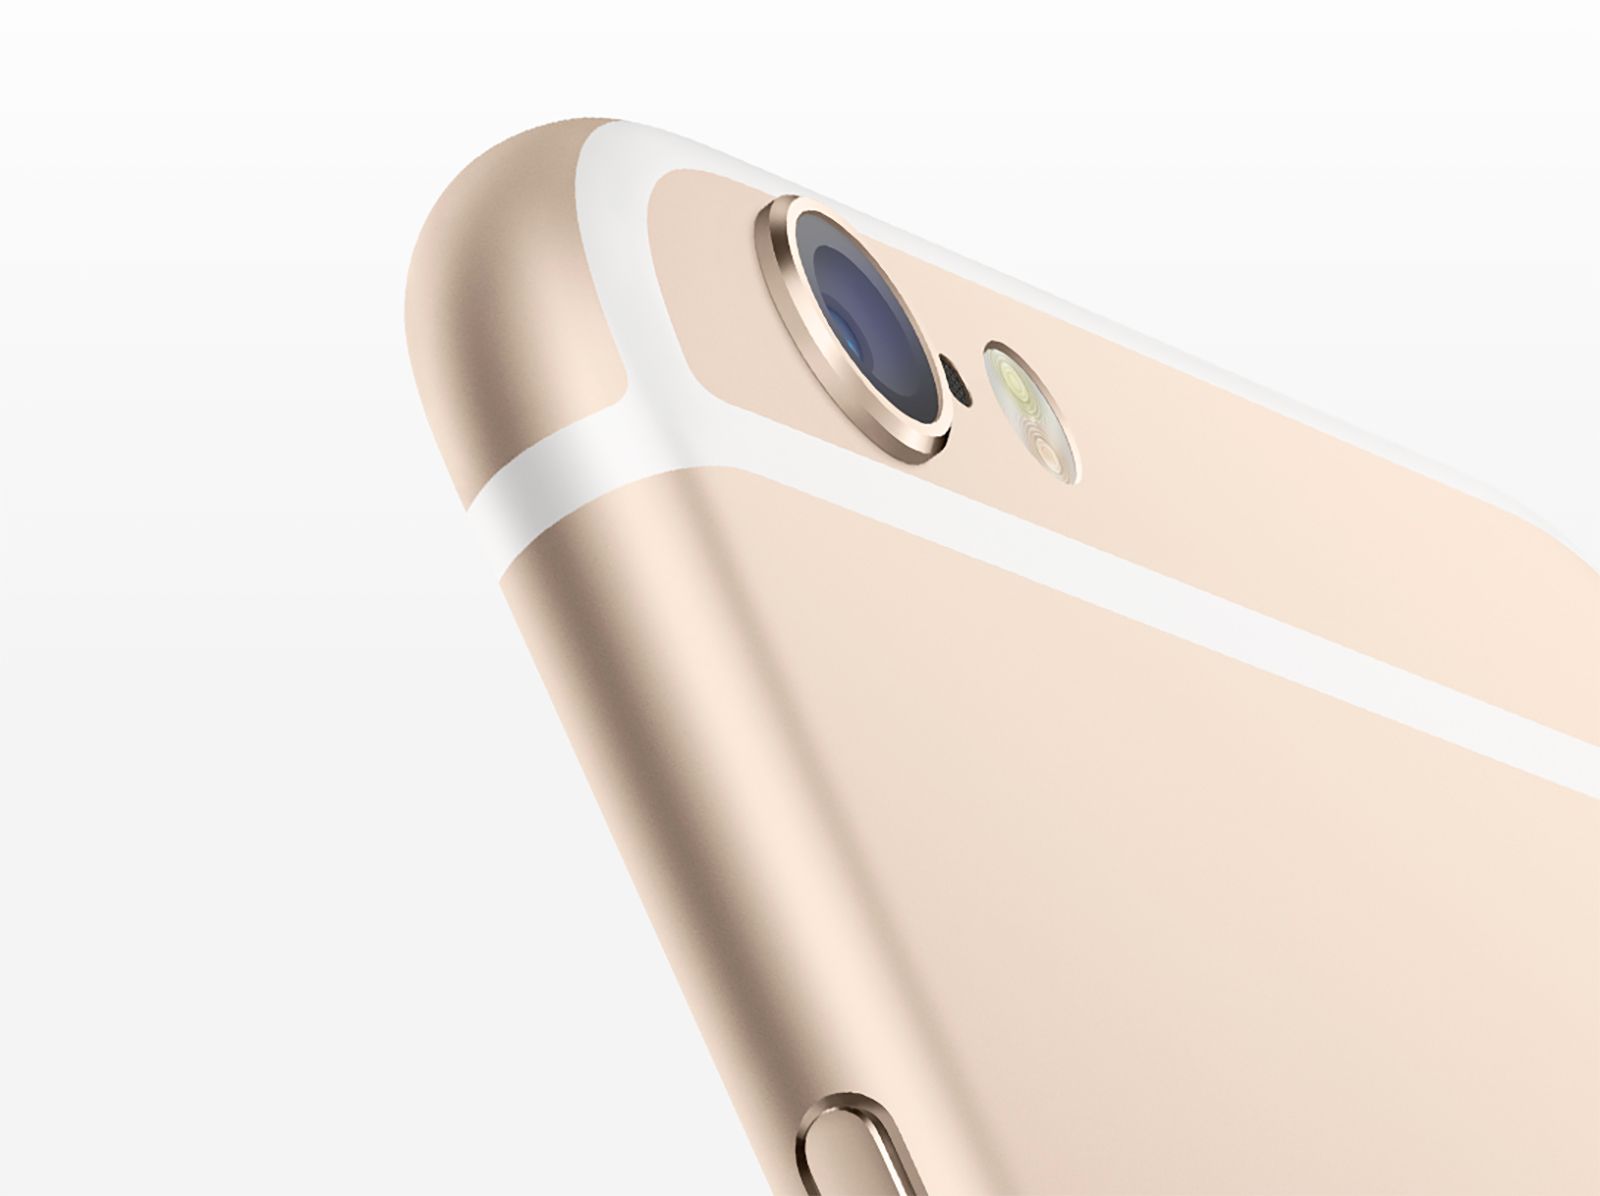 apple iphone 6s and ipad pro launch date should be 9 september sales start 18 september image 1